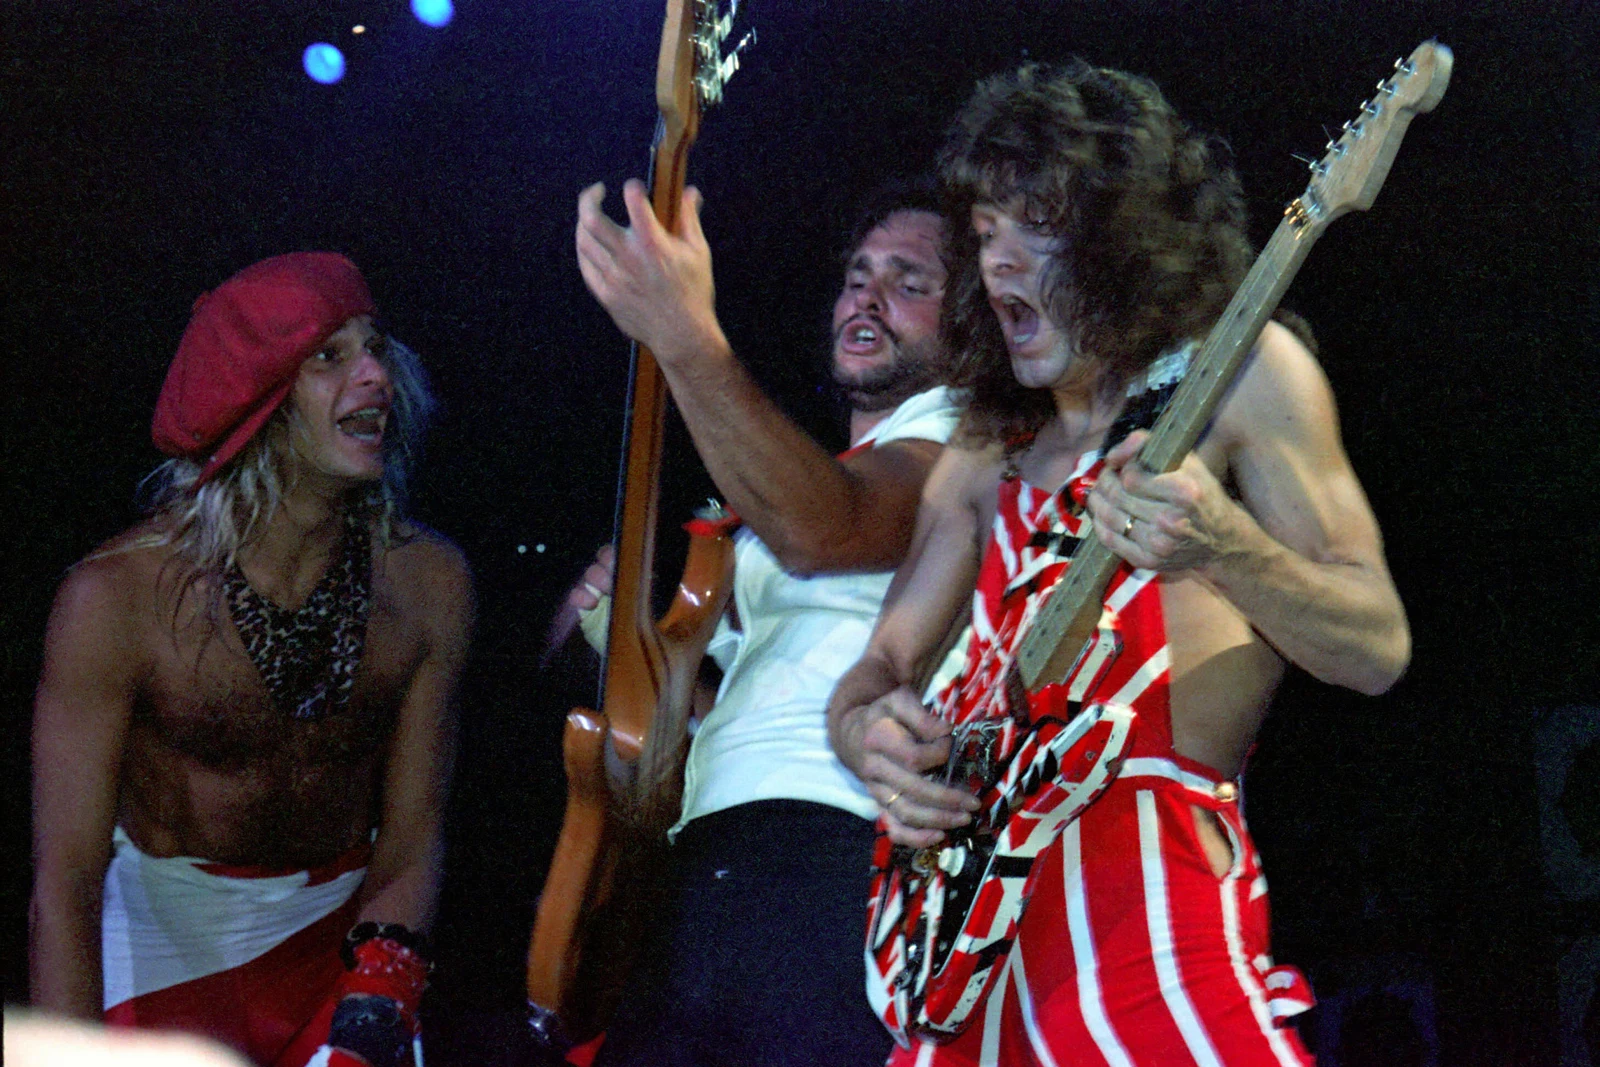 35 Years Ago: Revisiting Van Halen's Ill-Fated '1984' Tour